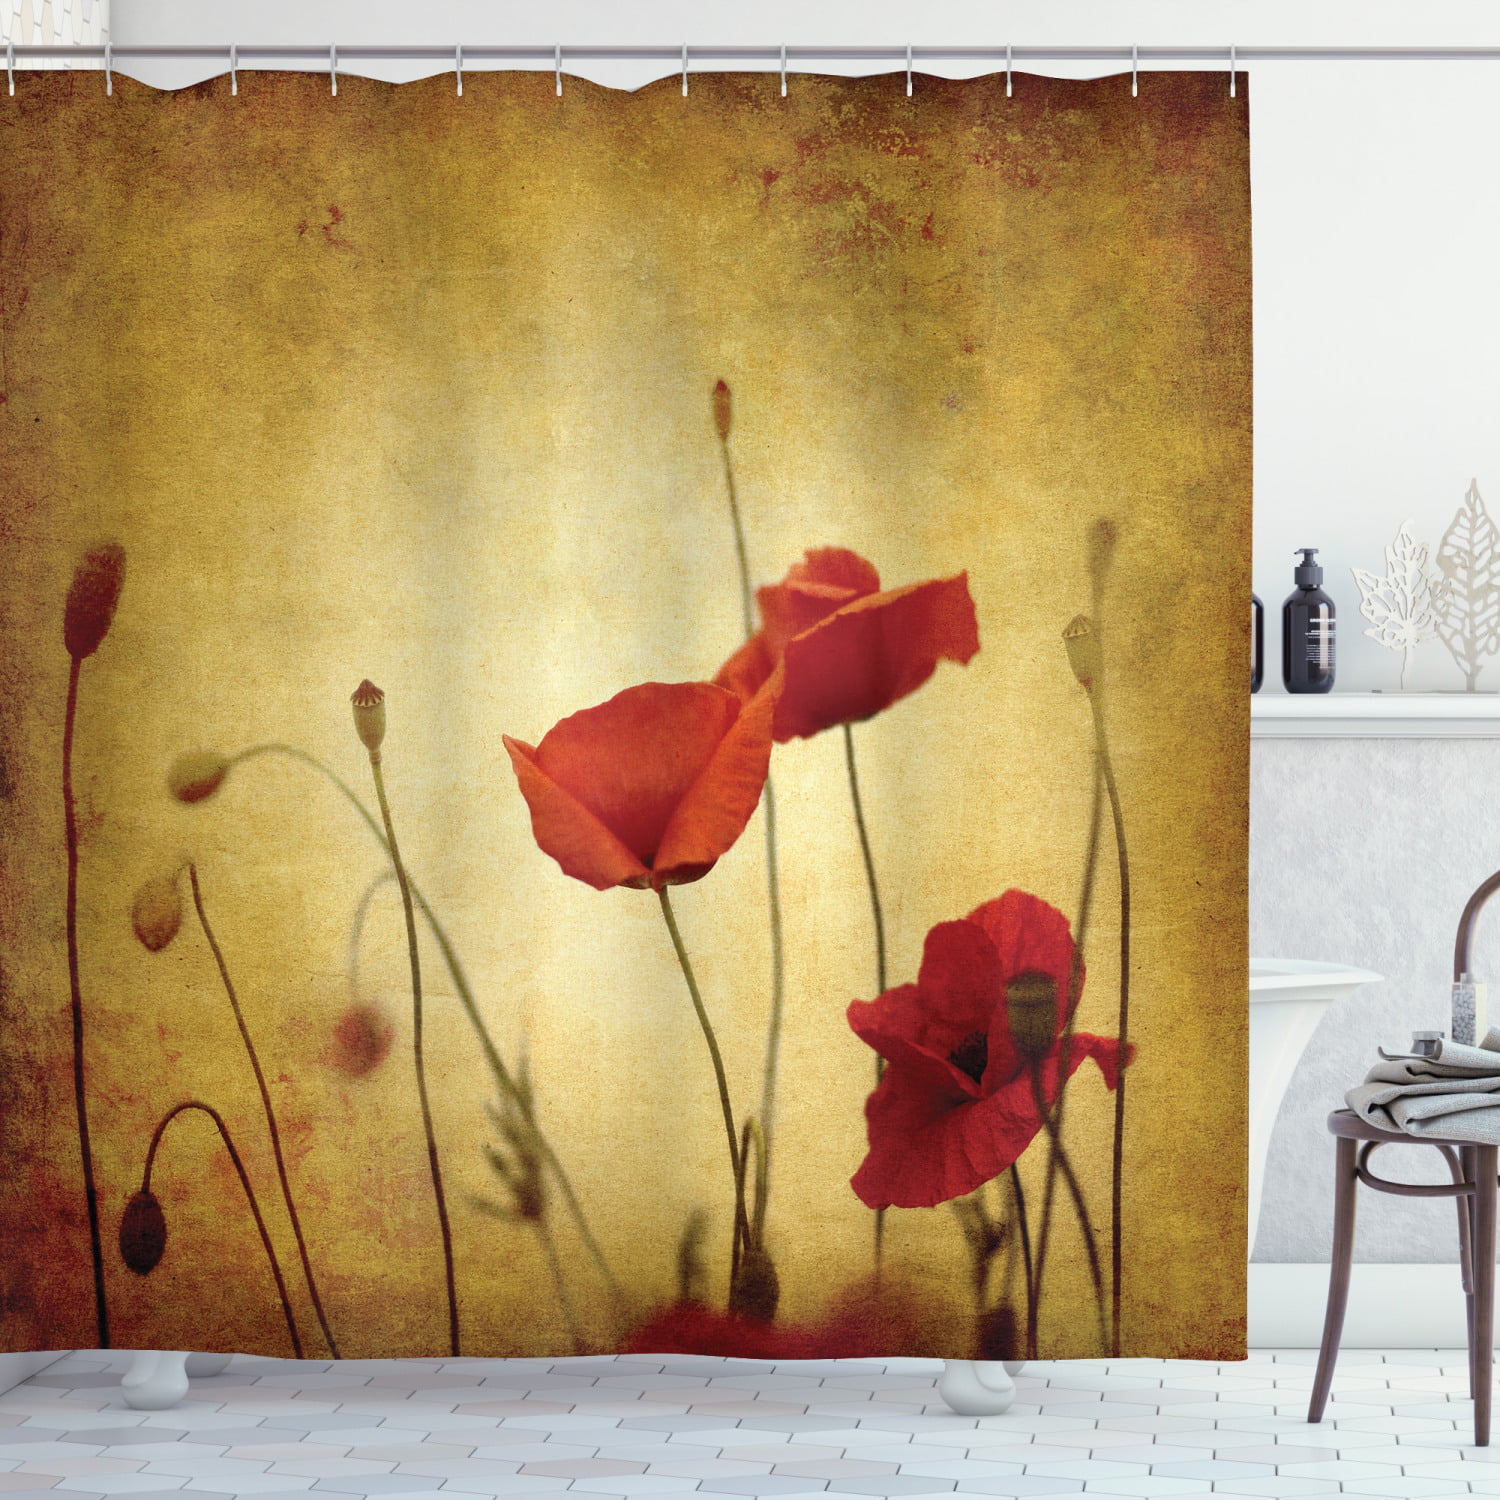 Red Poppy flower Shower Curtain Home Bathroom Decor Fabric & 12hooks 71*71inches 